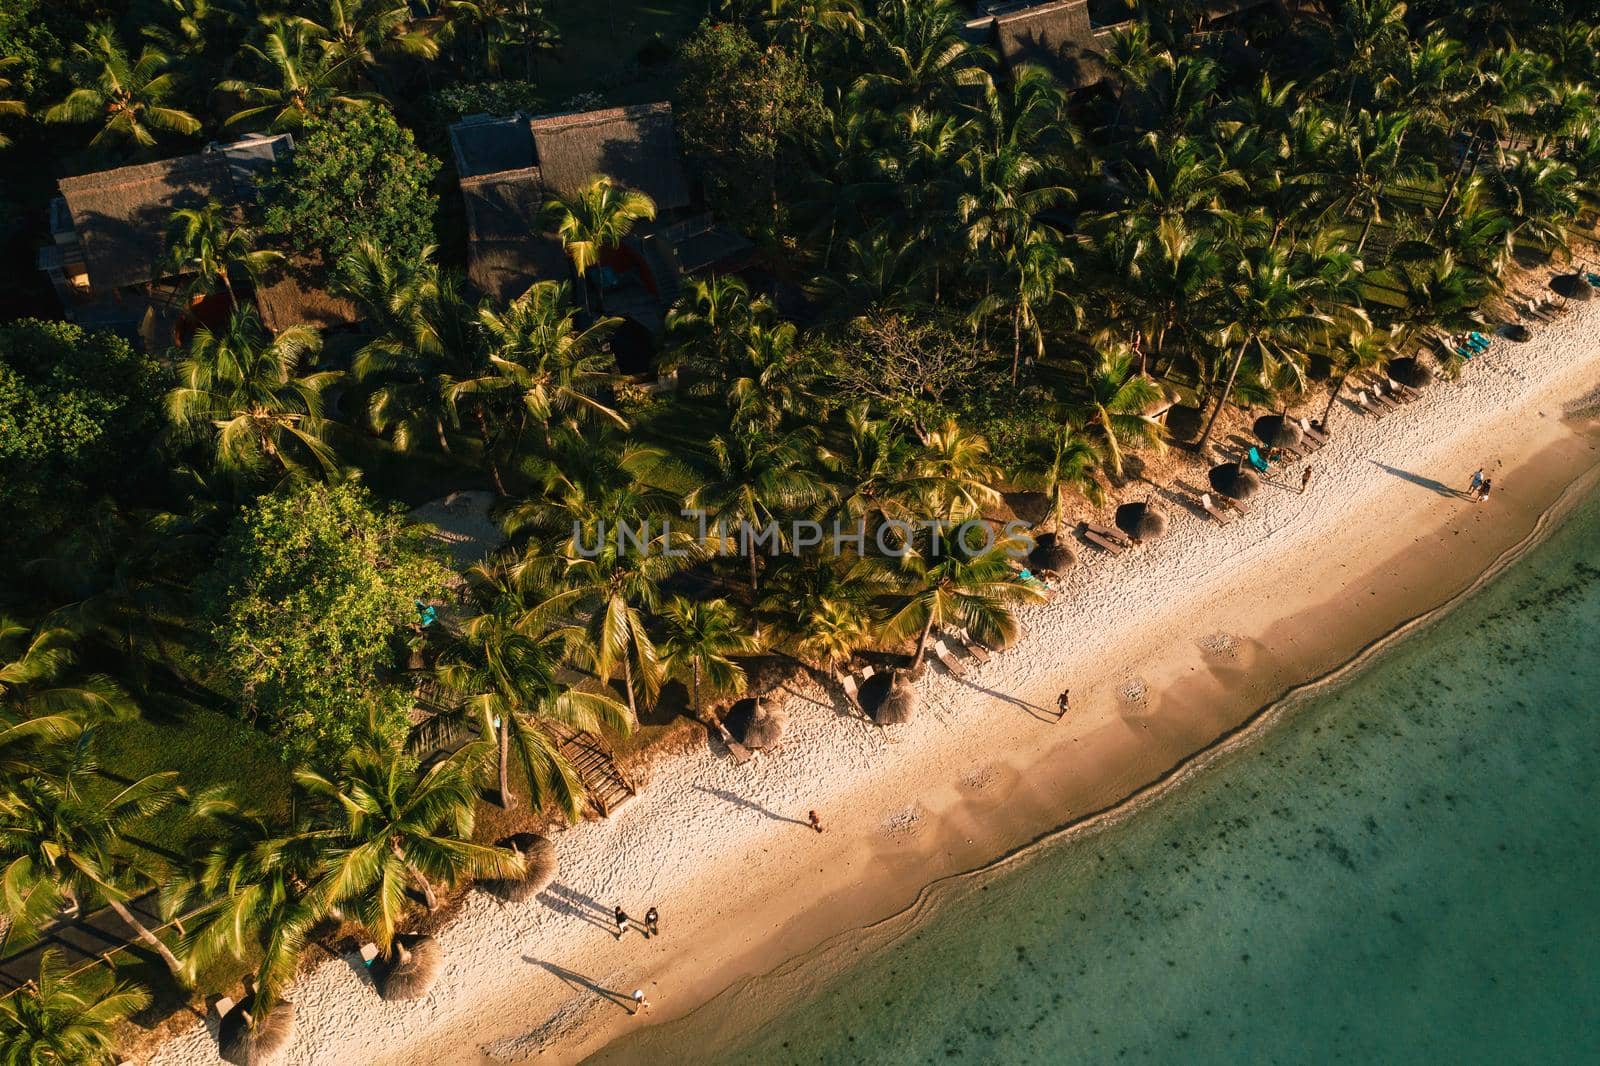 On the beautiful beach of the island of Mauritius along the coast. Shooting from a bird's eye view of the island of Mauritius. by Lobachad